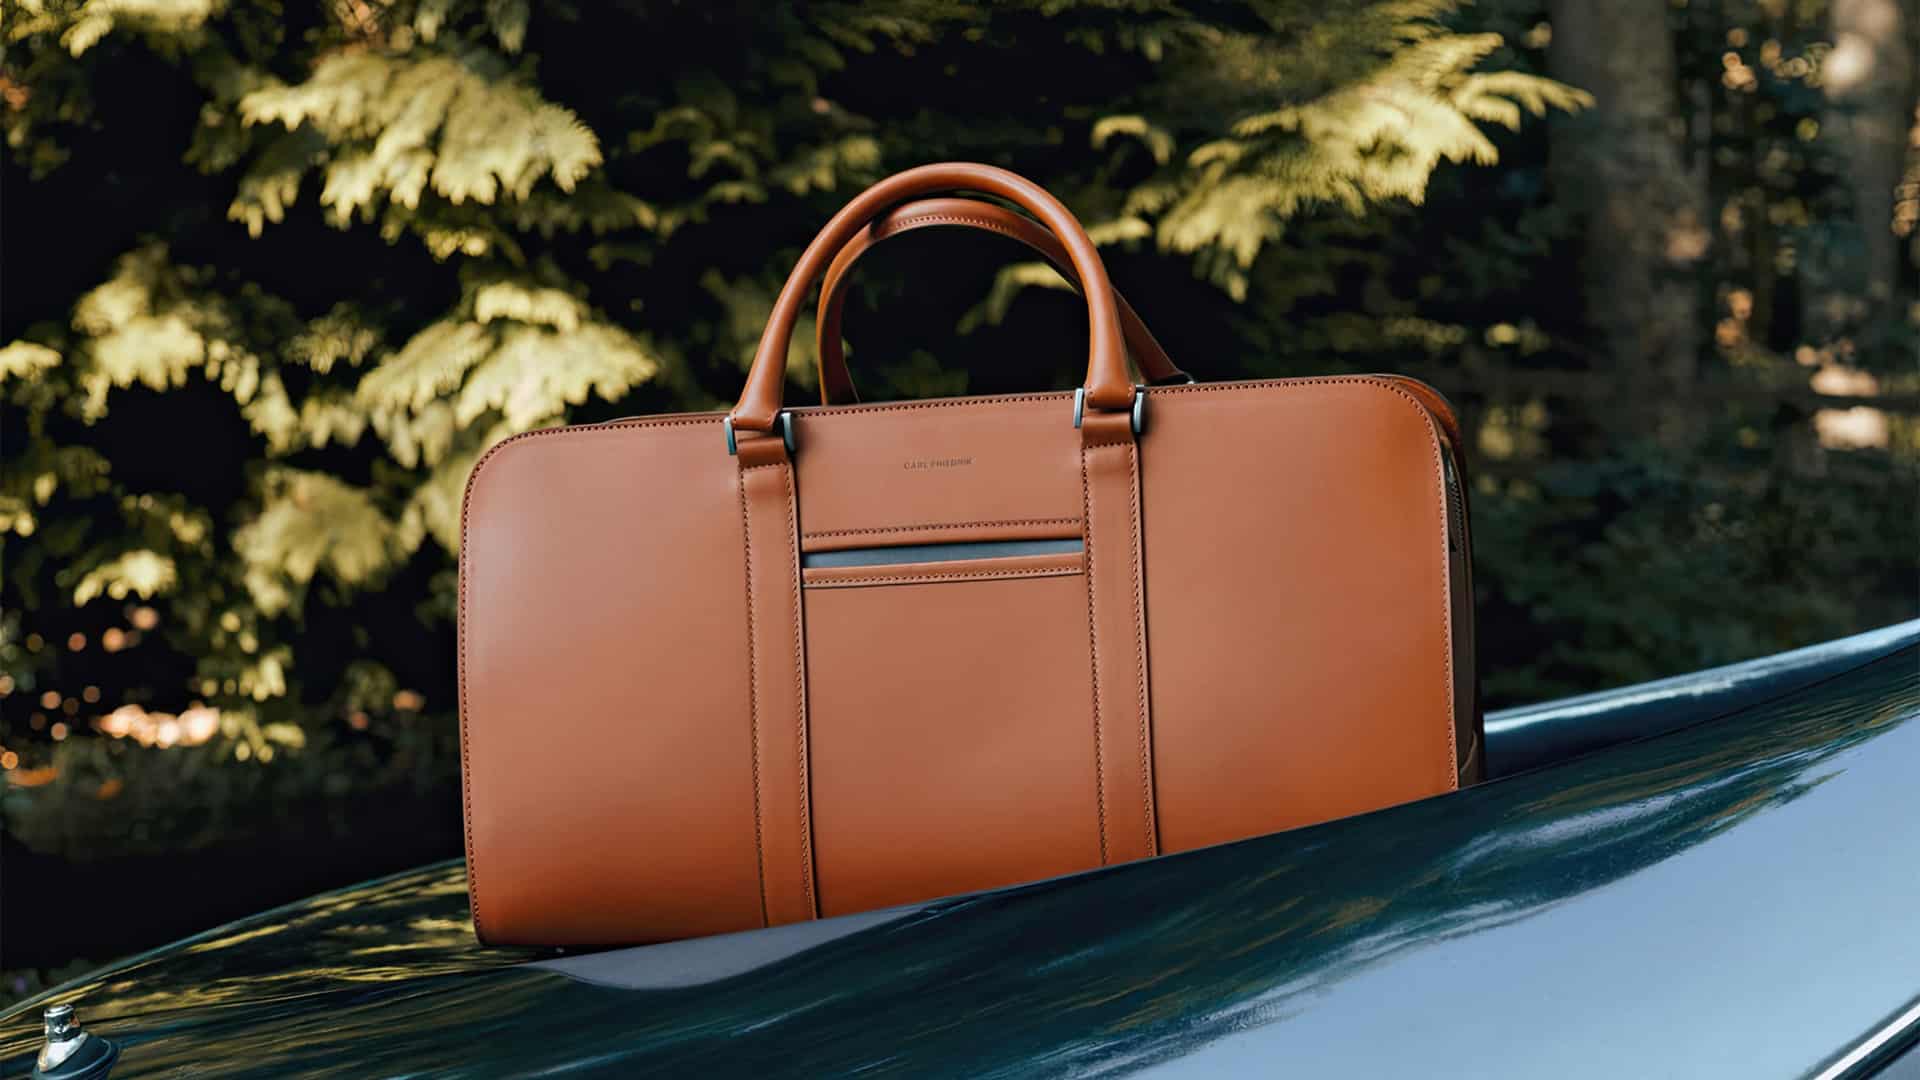 Top 10 Most Searched Luxury Handbag Brands